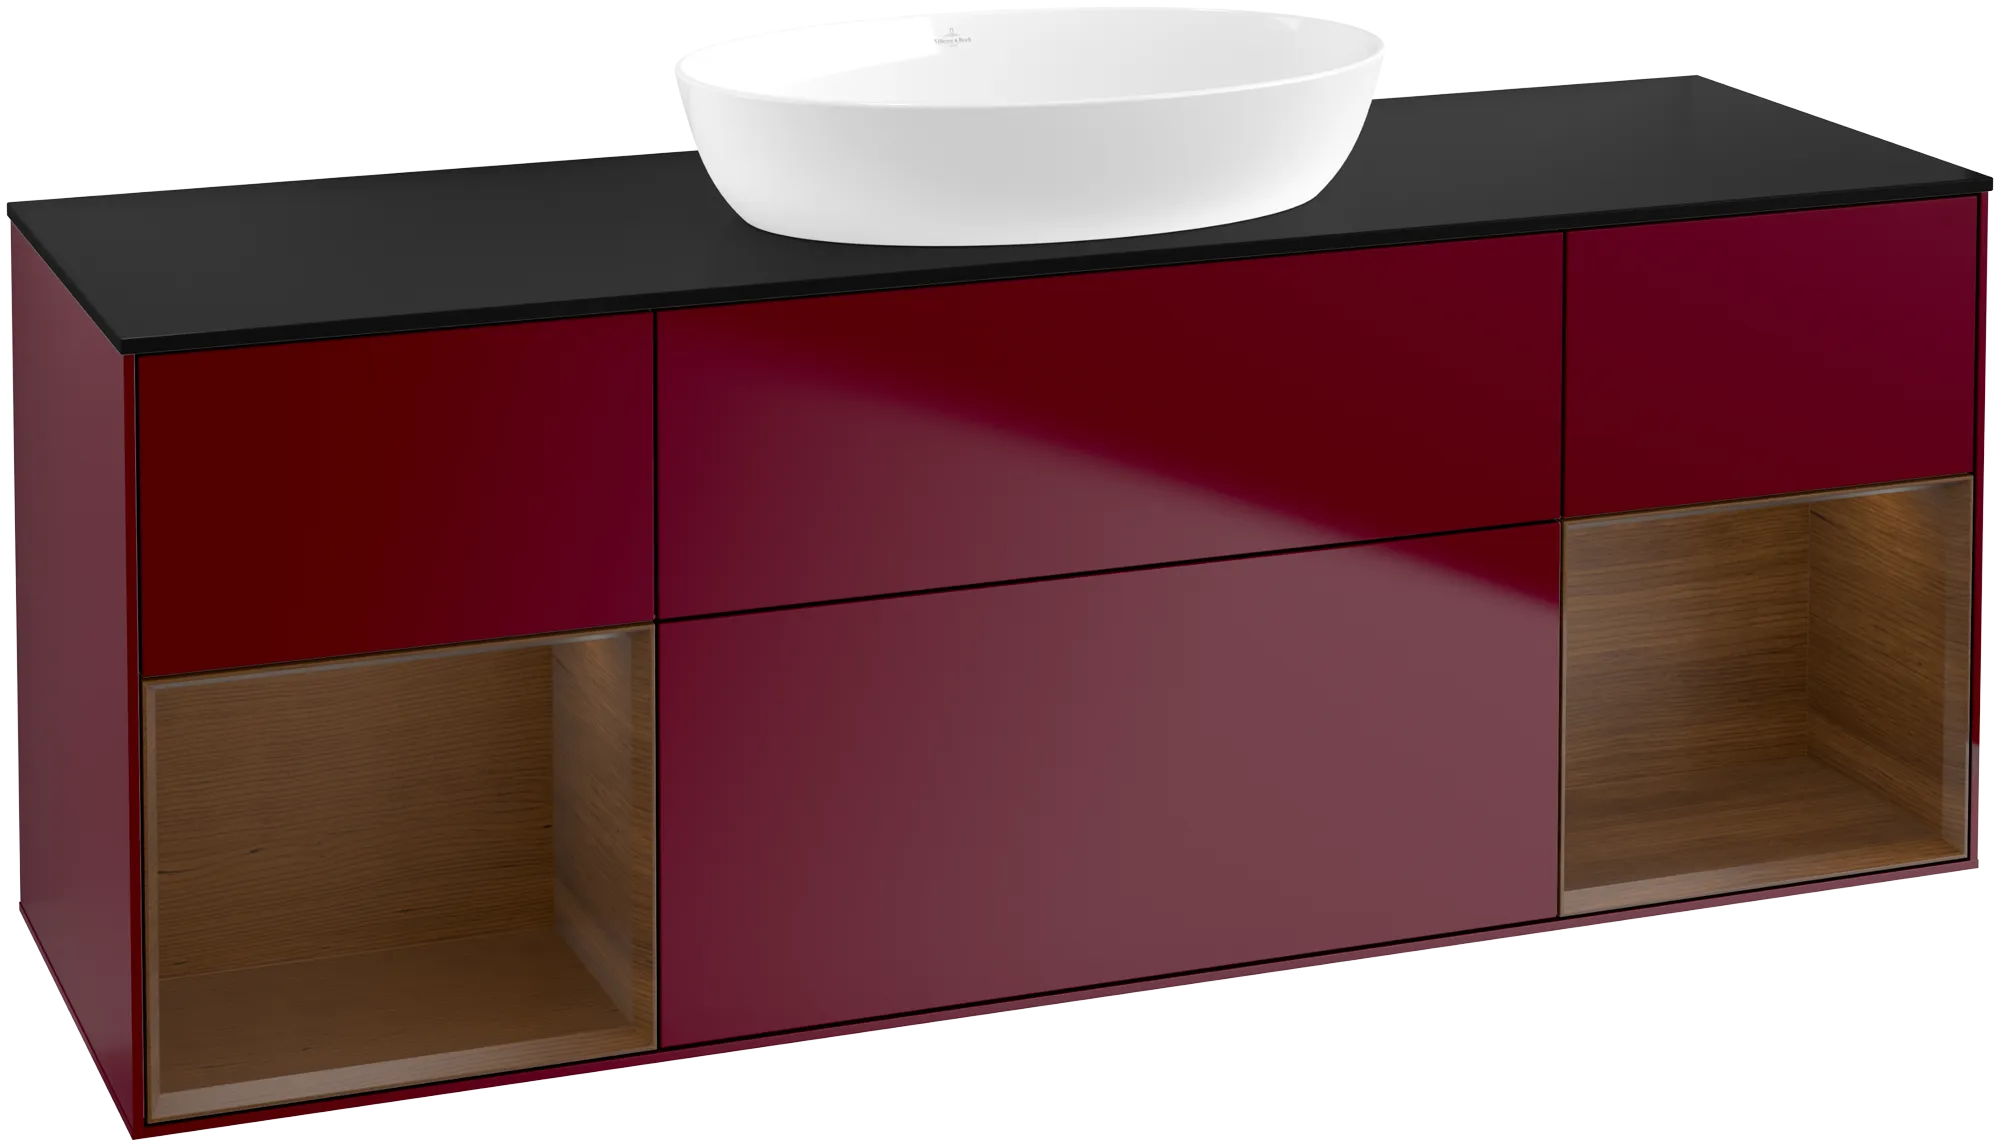 Picture of VILLEROY BOCH Finion Vanity unit, with lighting, 4 pull-out compartments, 1600 x 603 x 501 mm, Peony Matt Lacquer / Walnut Veneer / Glass Black Matt #GD02GNHB